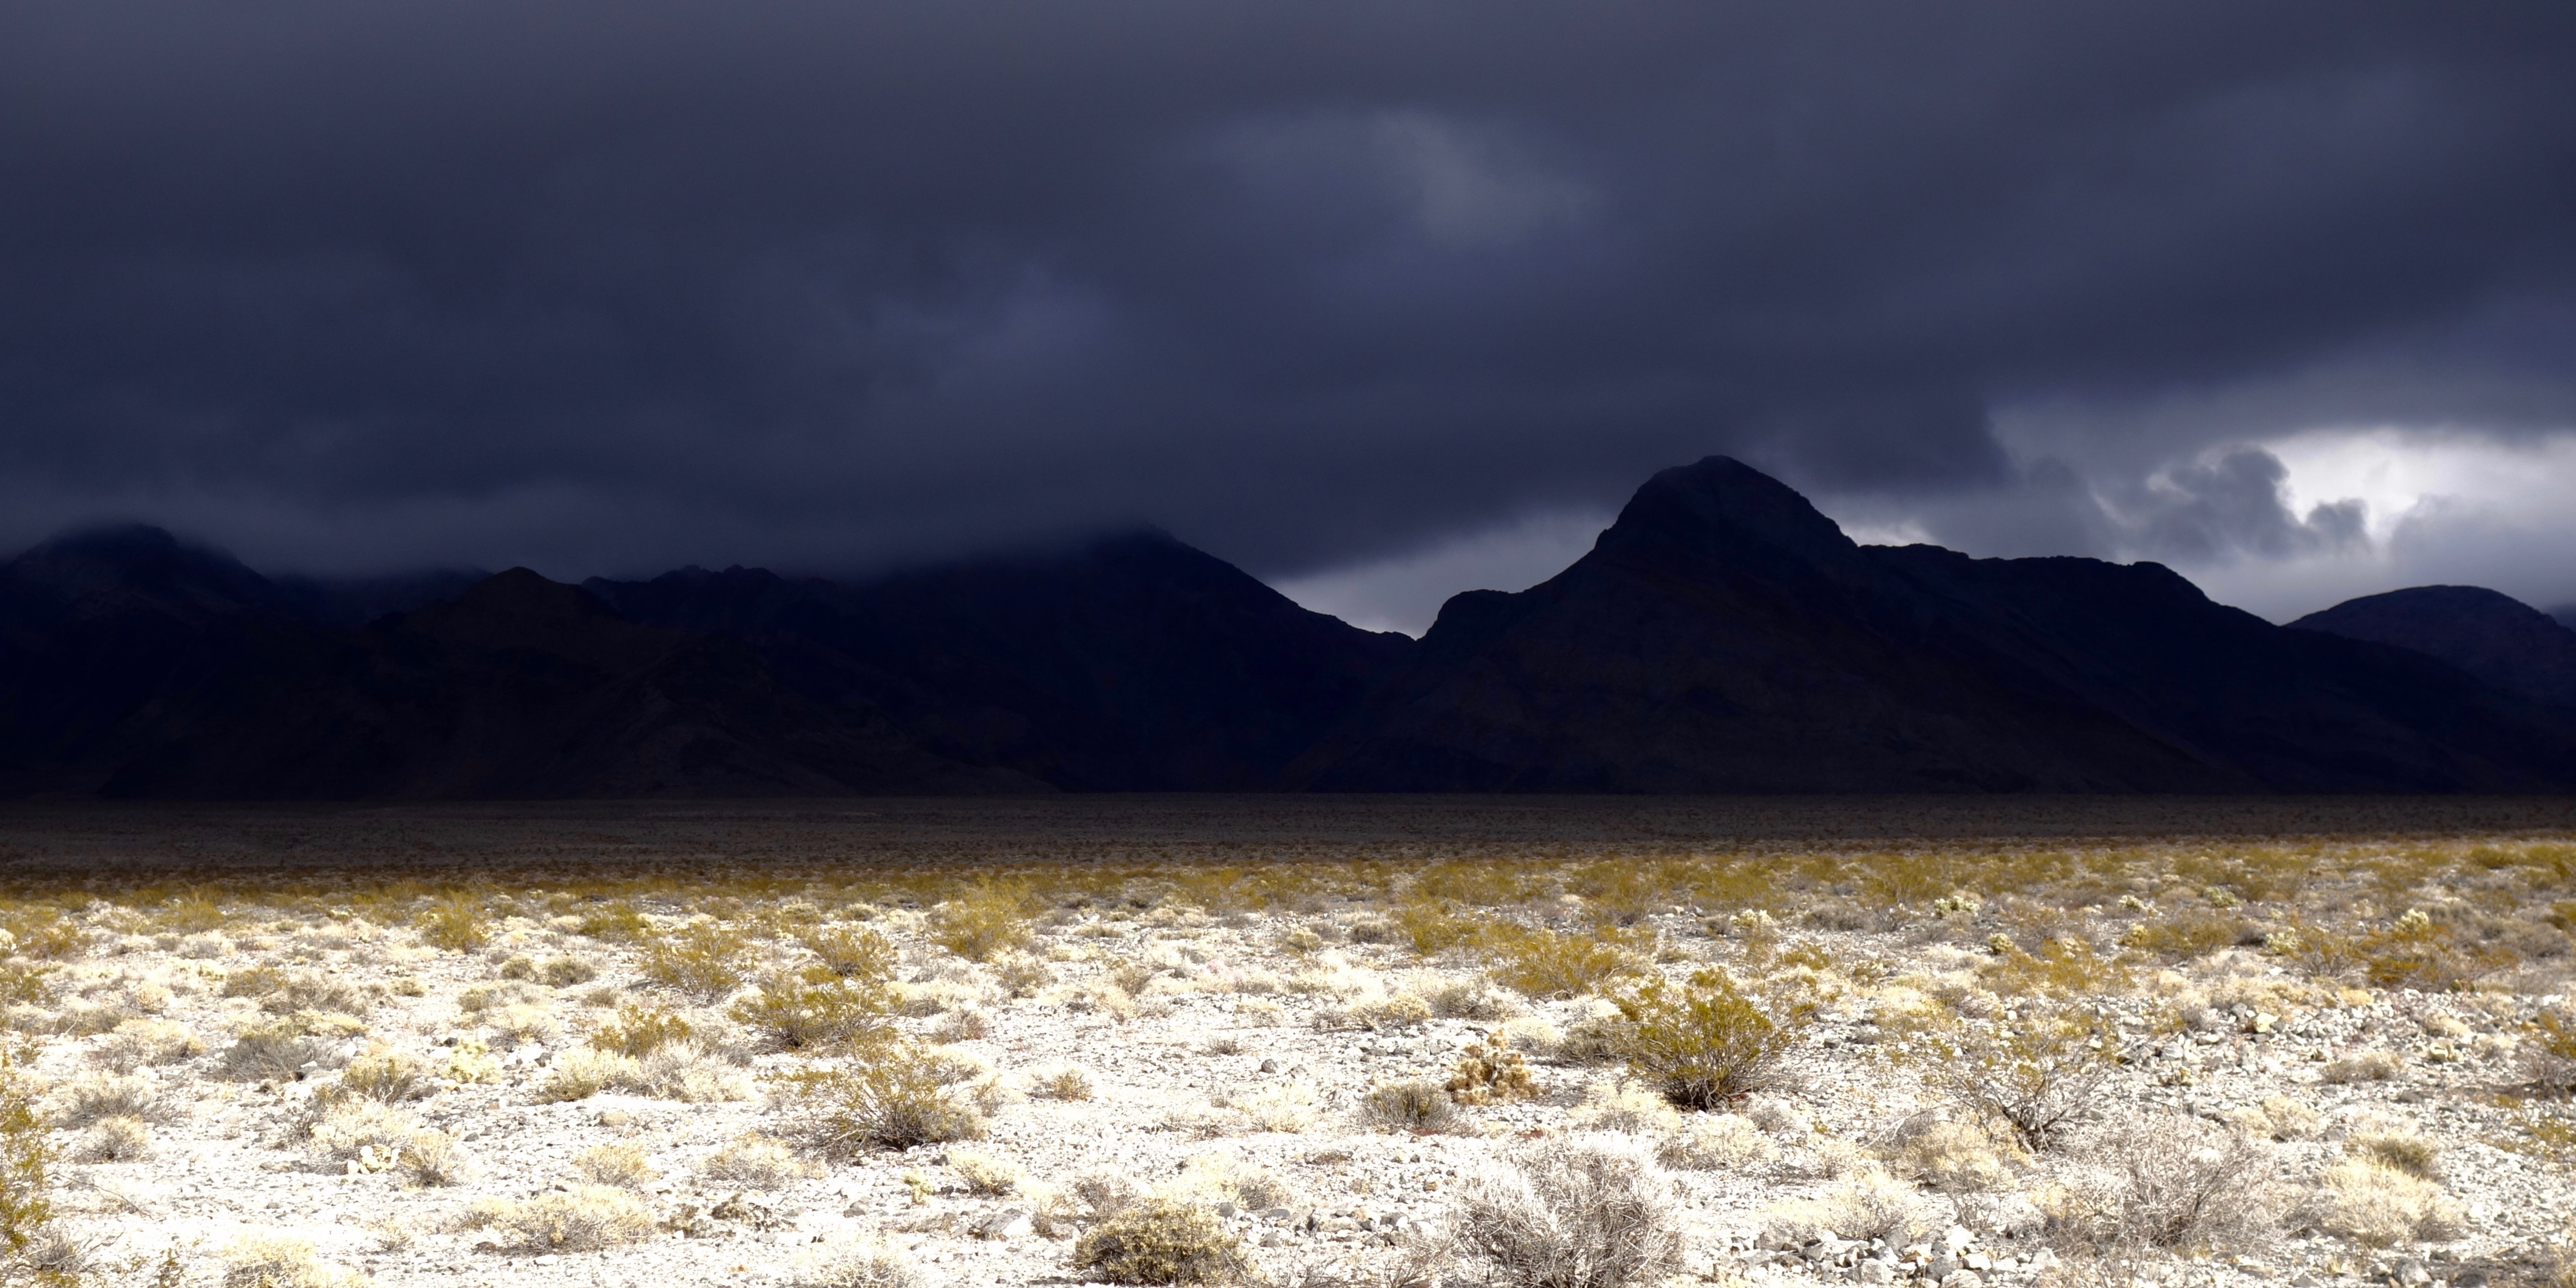 A thunderstorm in Death Valley